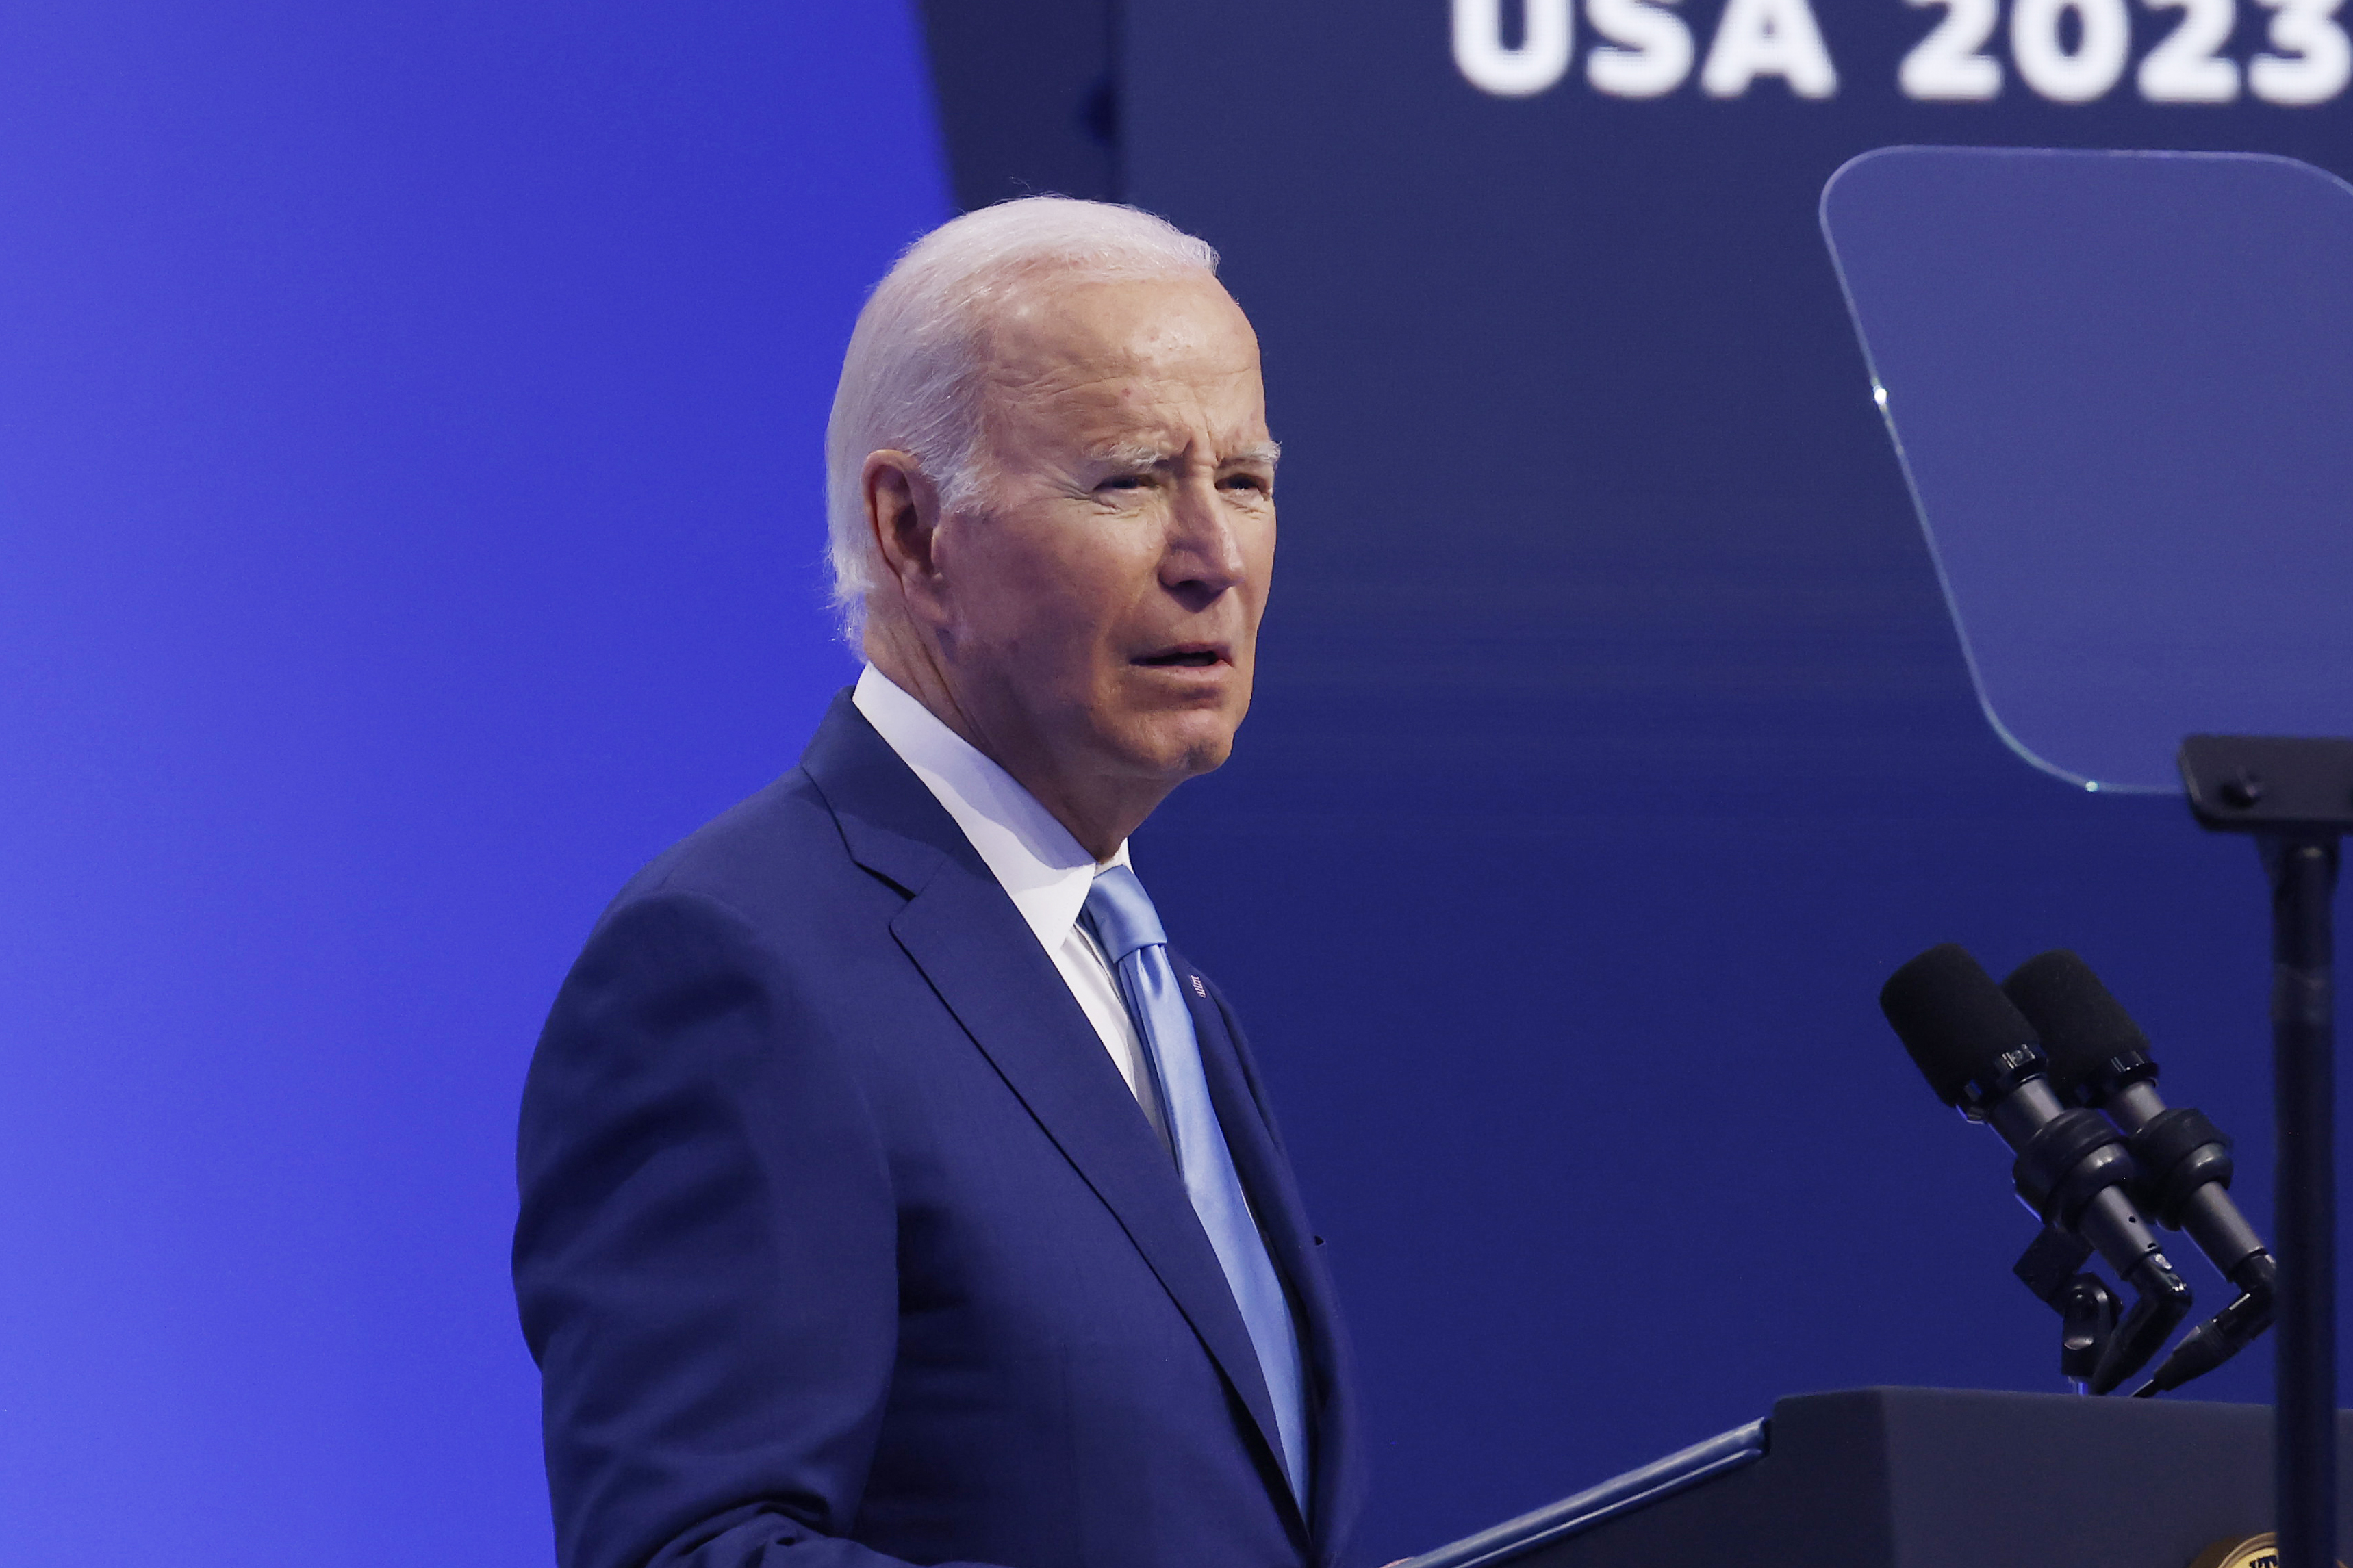 President Joe Biden in a blue suit and light blue tie is speaking at a podium with microphones. The background is blue, and part of the text "USA 2023" is visible.